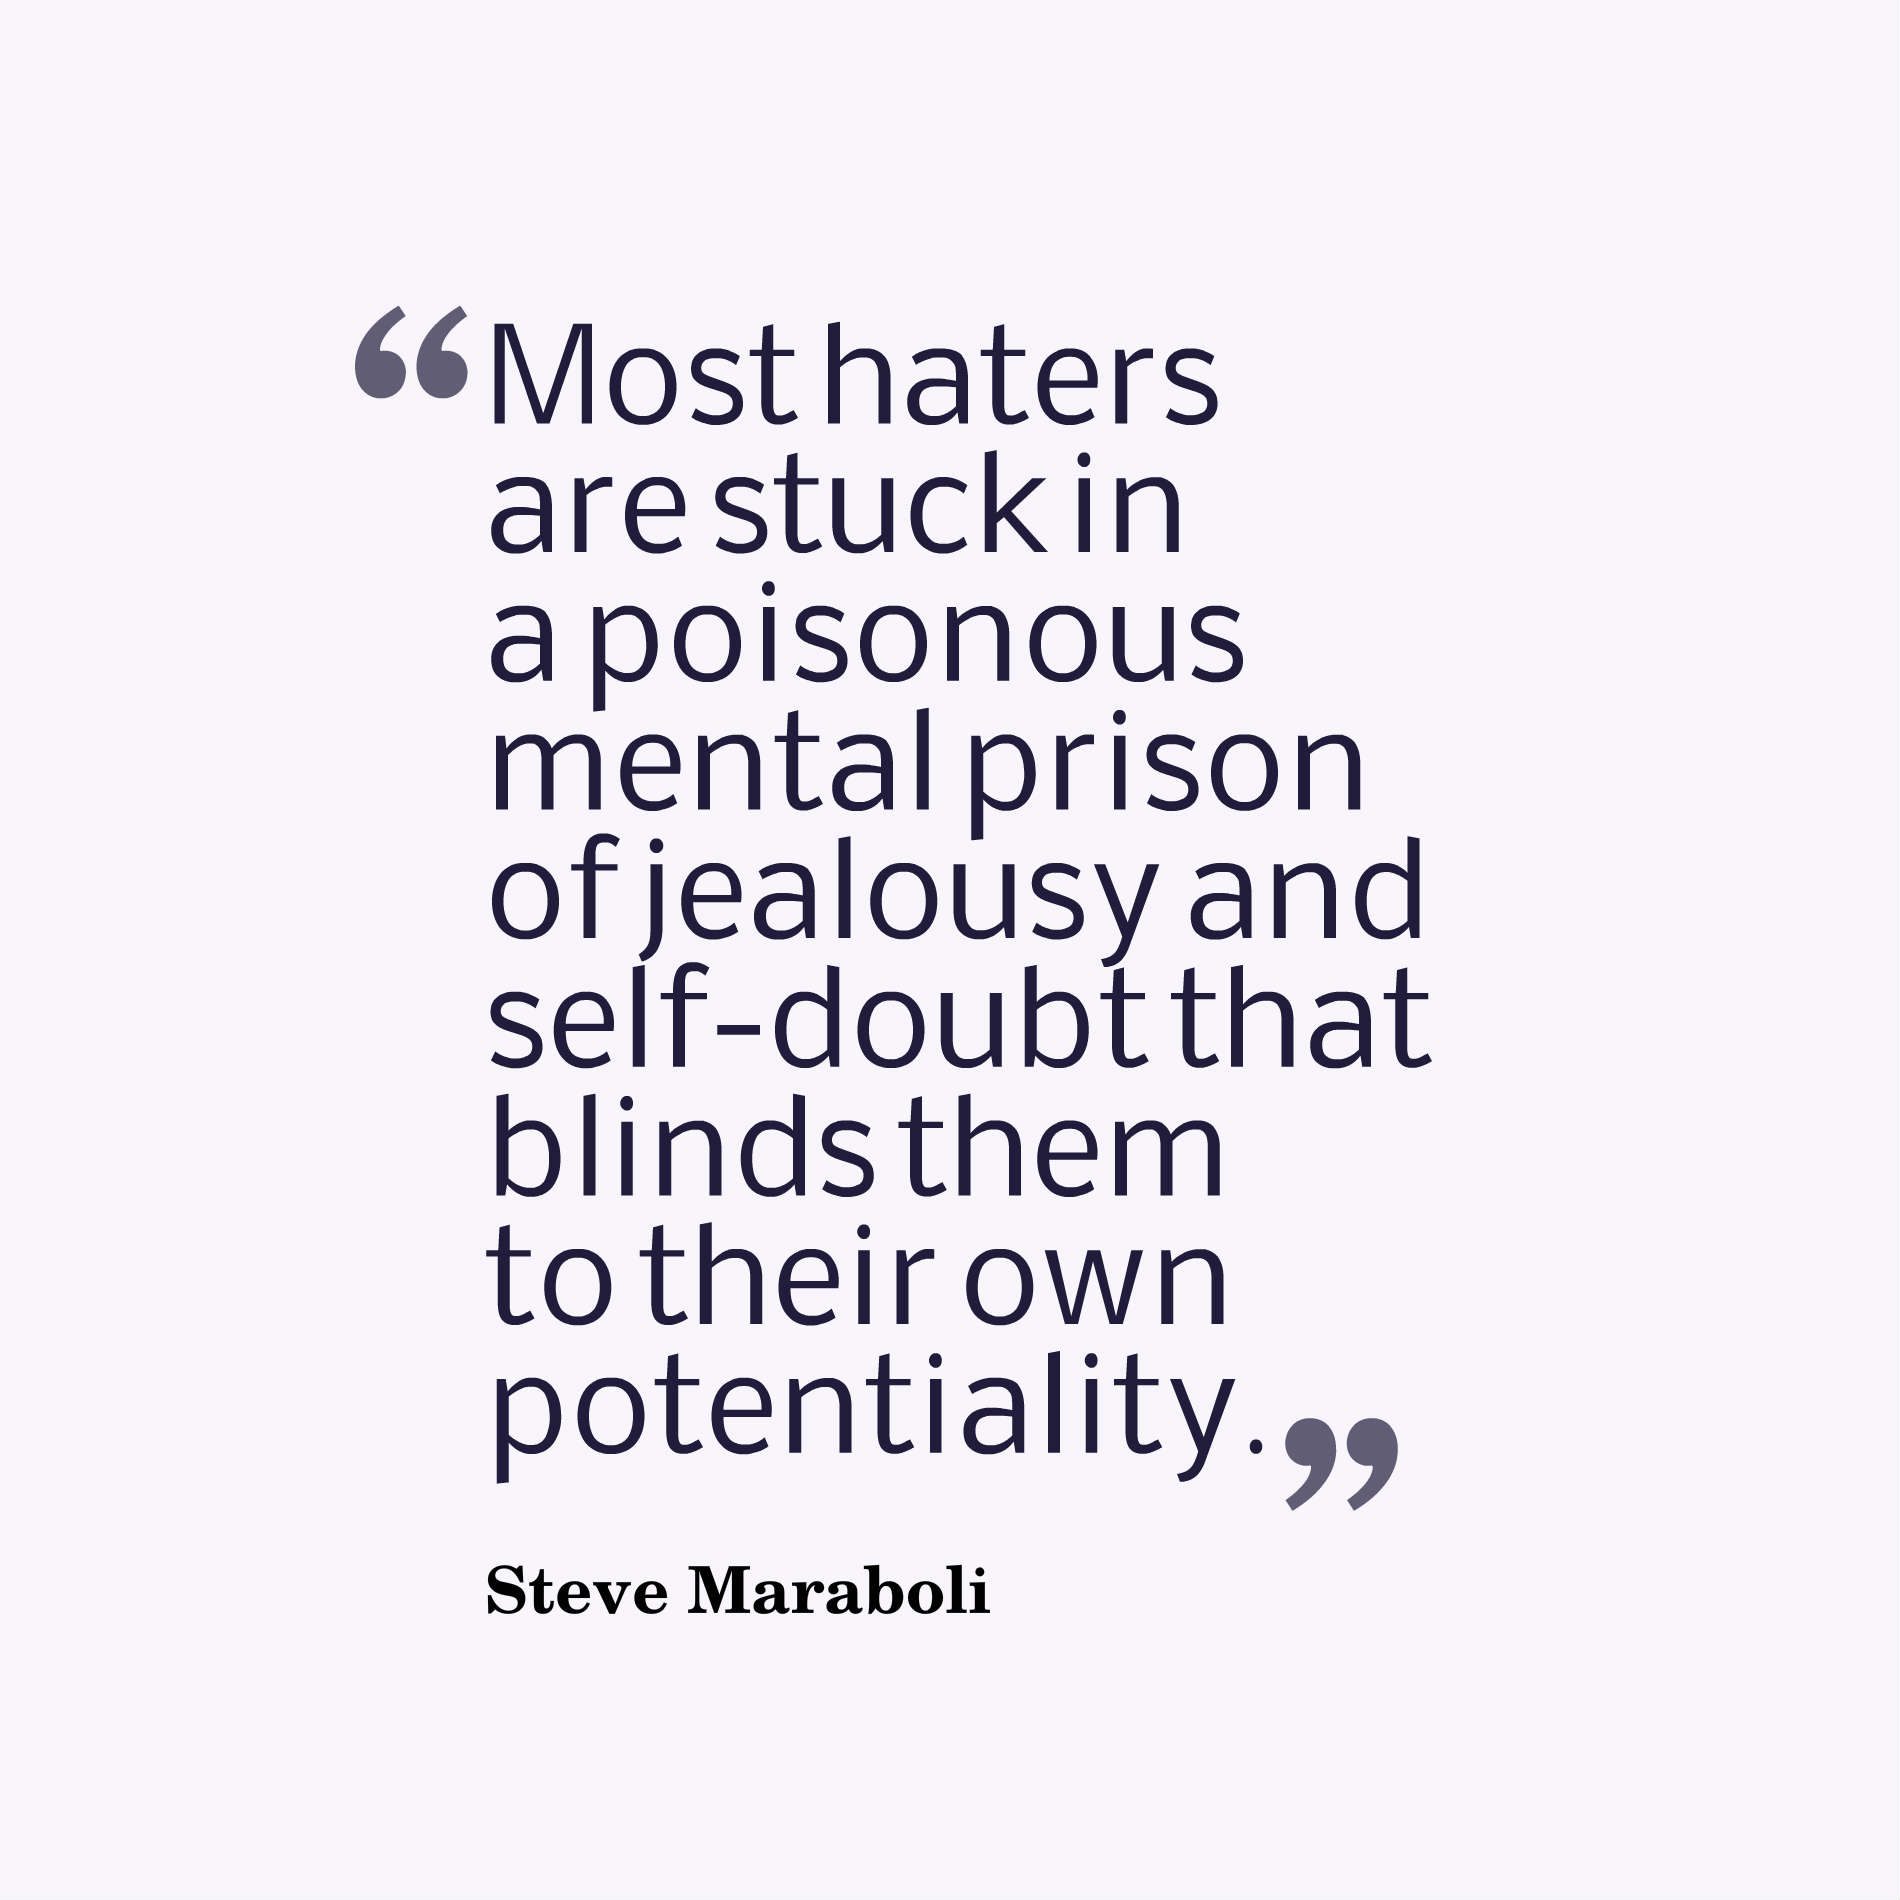 Most haters are stuck in a poisonous mental prison of jealousy and self-doubt that blinds them to their own potentiality.